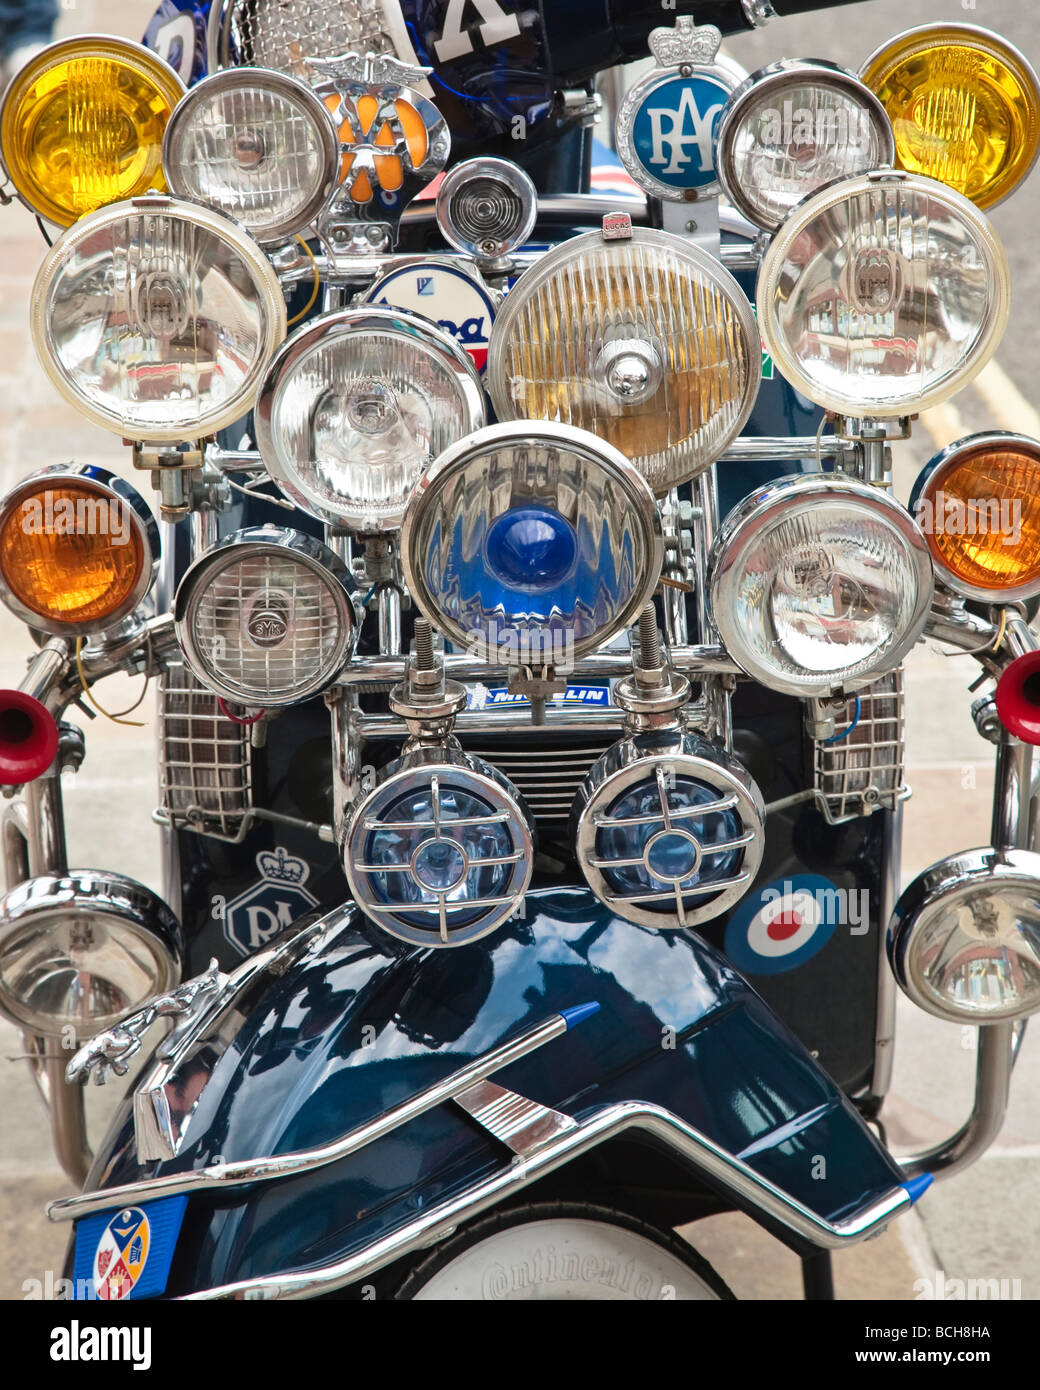 Mod Vespa scooter customized with chrome lights and mirrors Stock Photo